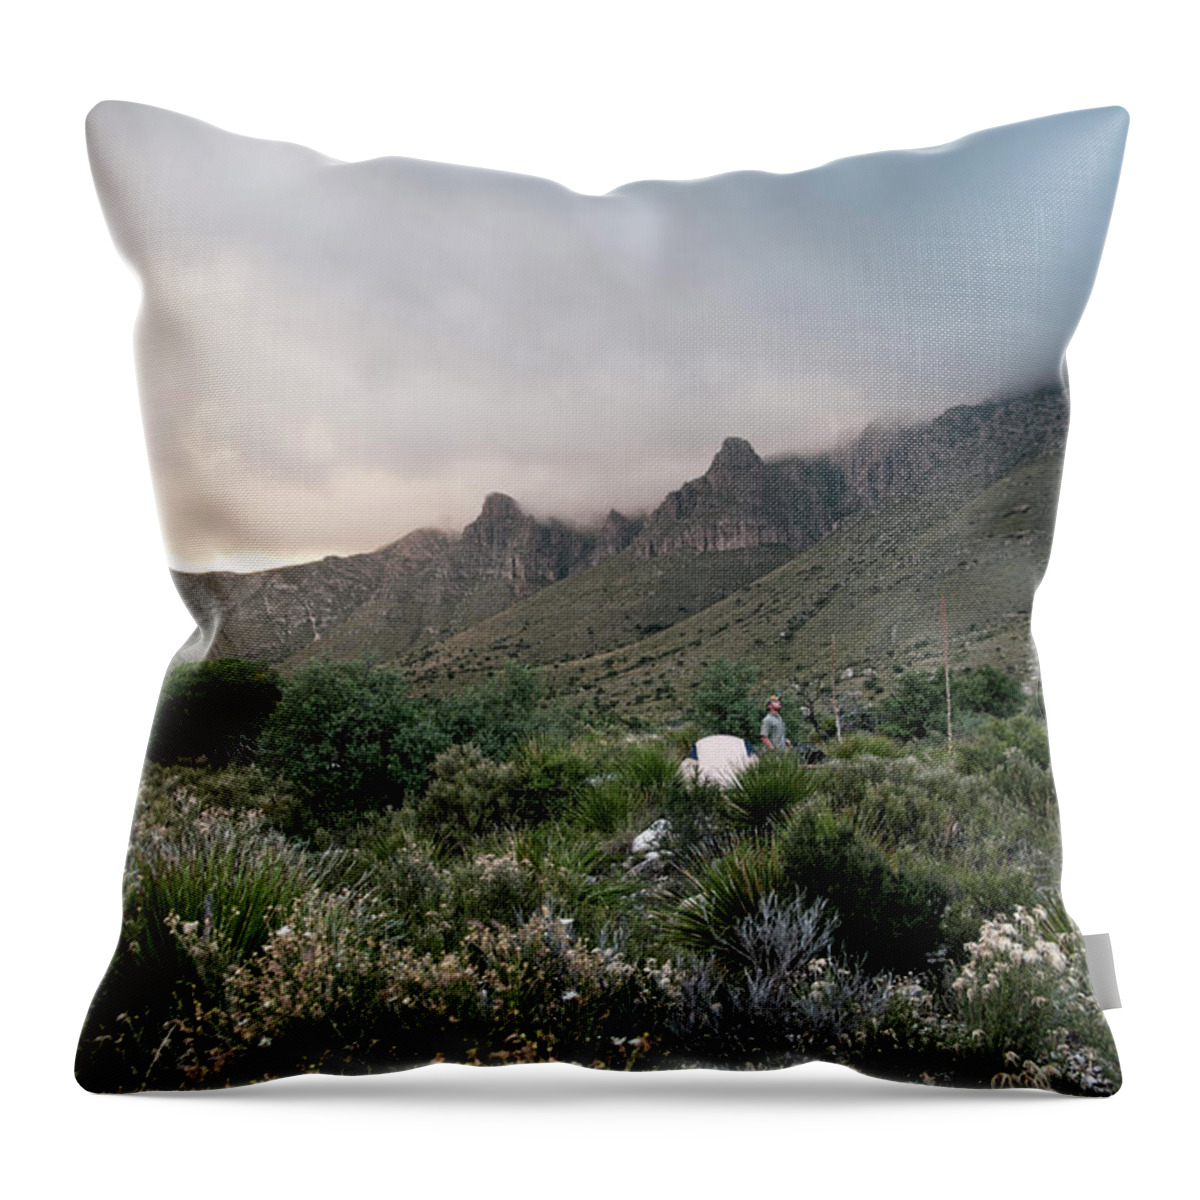 Scenics Throw Pillow featuring the photograph A Camper Looks Into The Sky At The by Bud Force